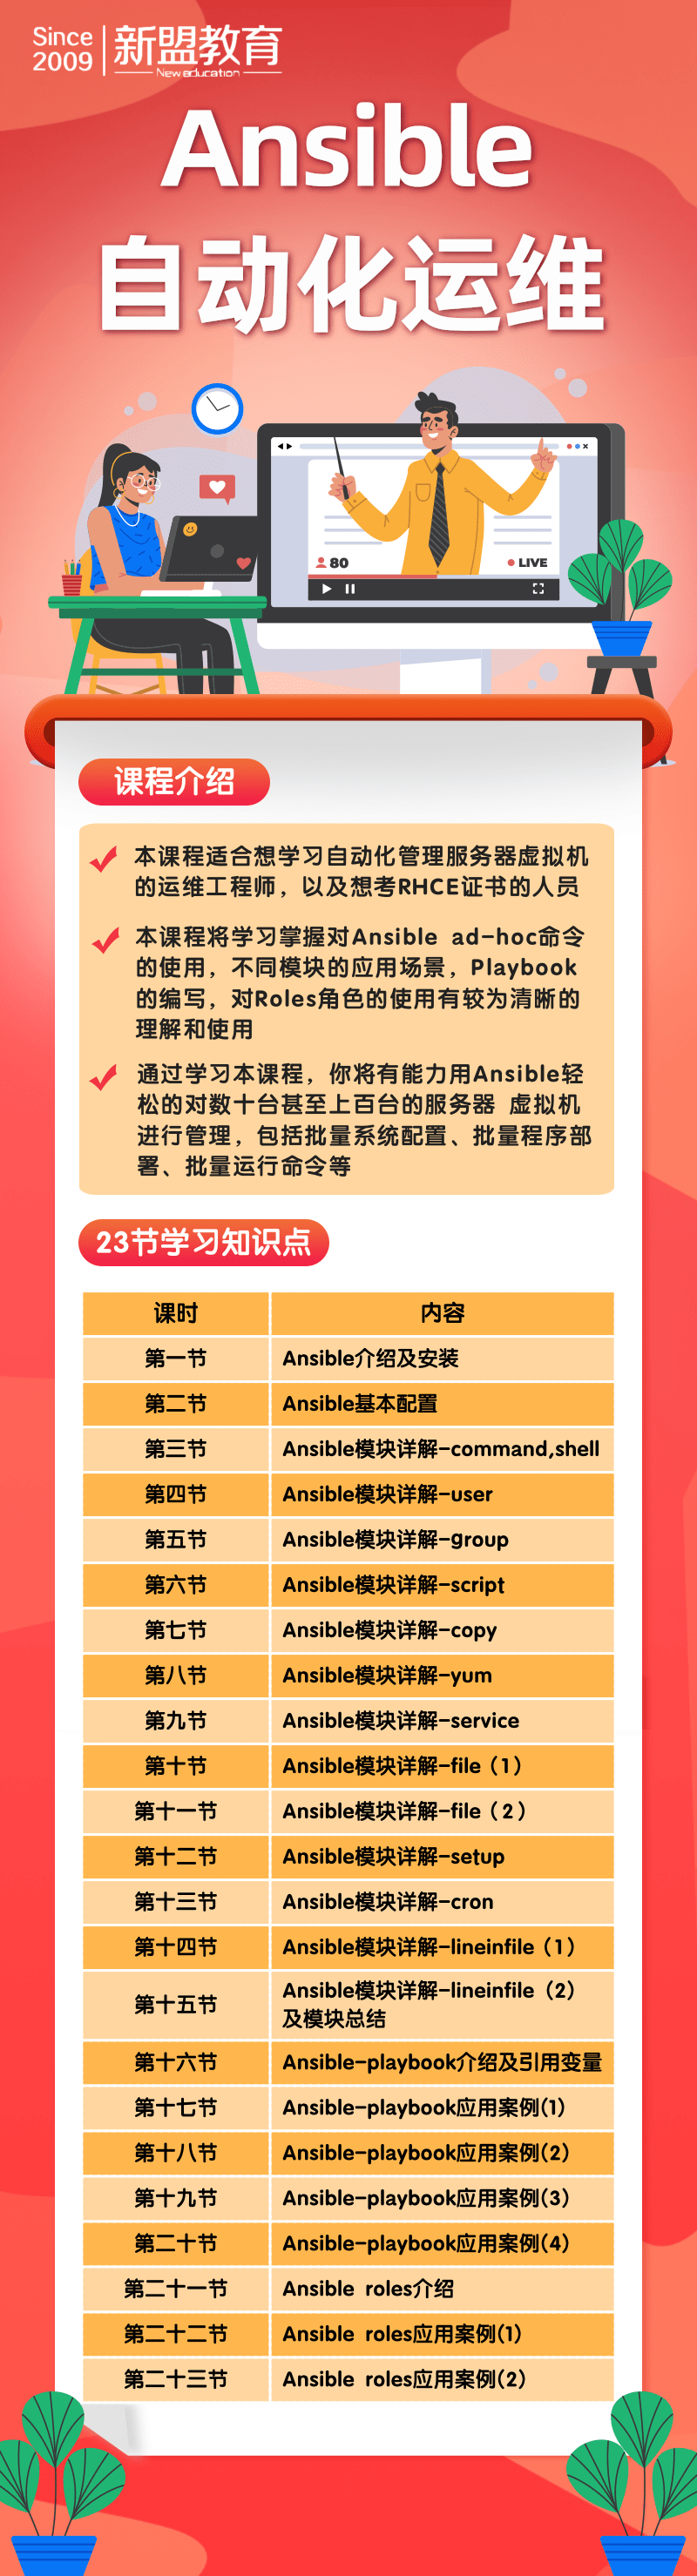 Ansible课程长图-凡科.png